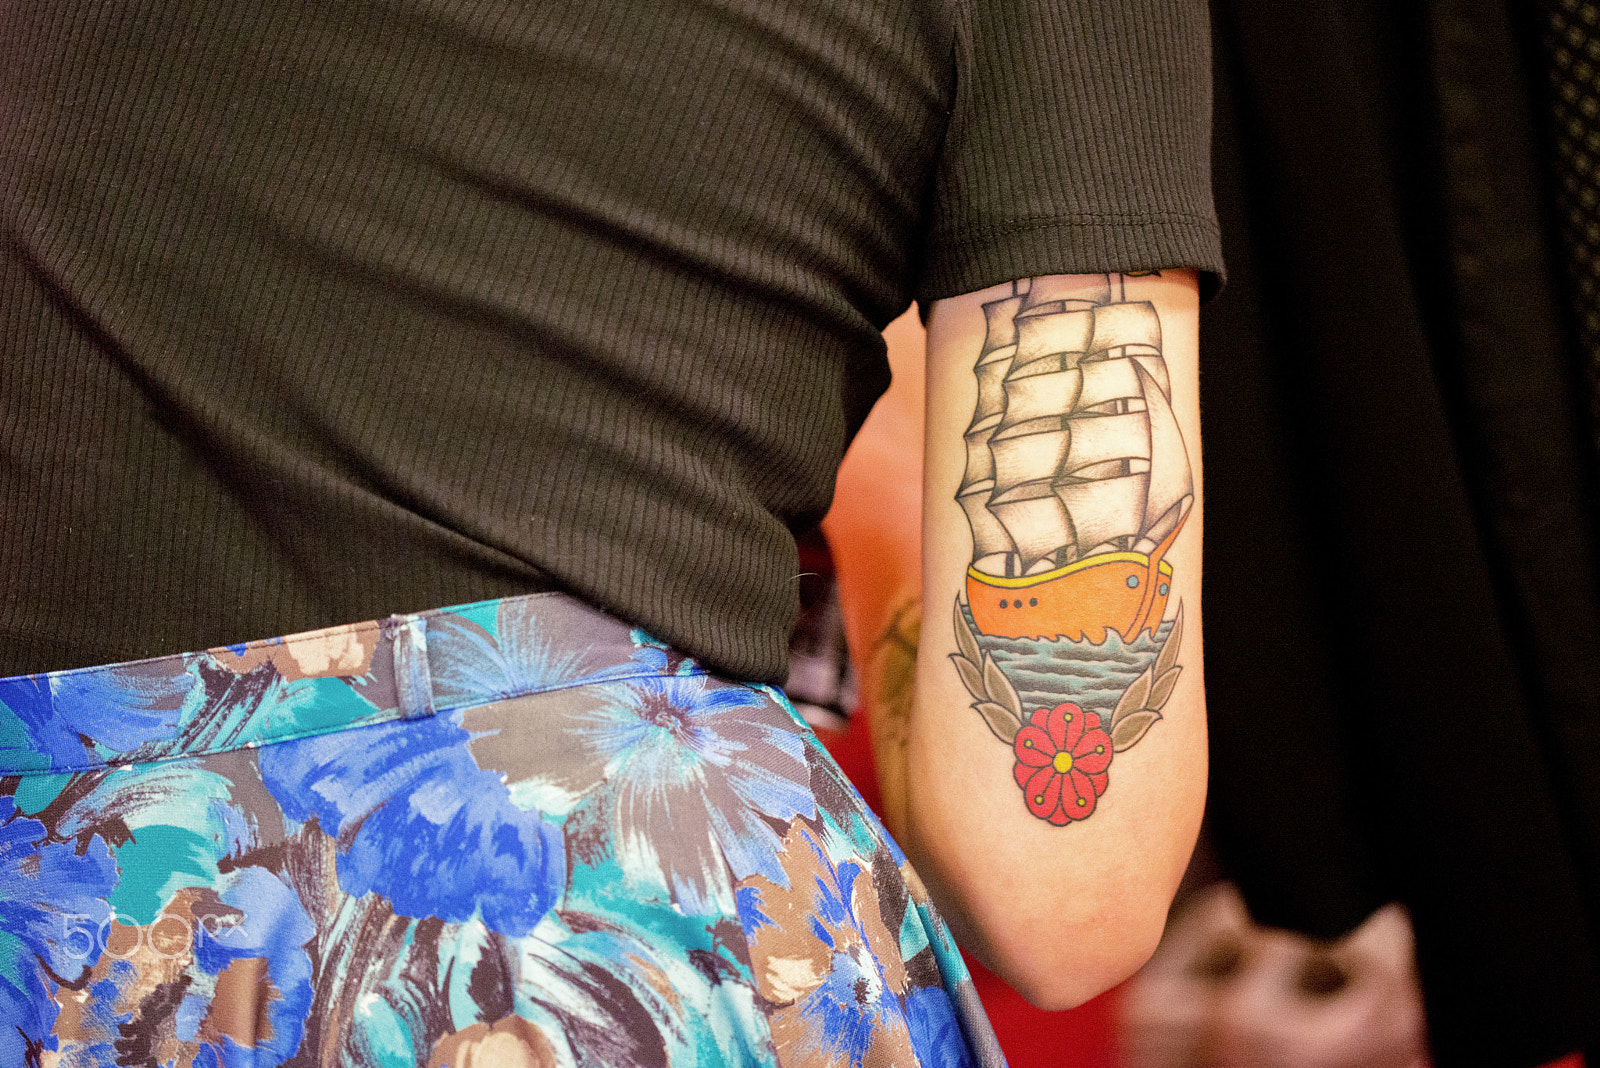 Nikon D610 sample photo. Girl with the tattoo photography